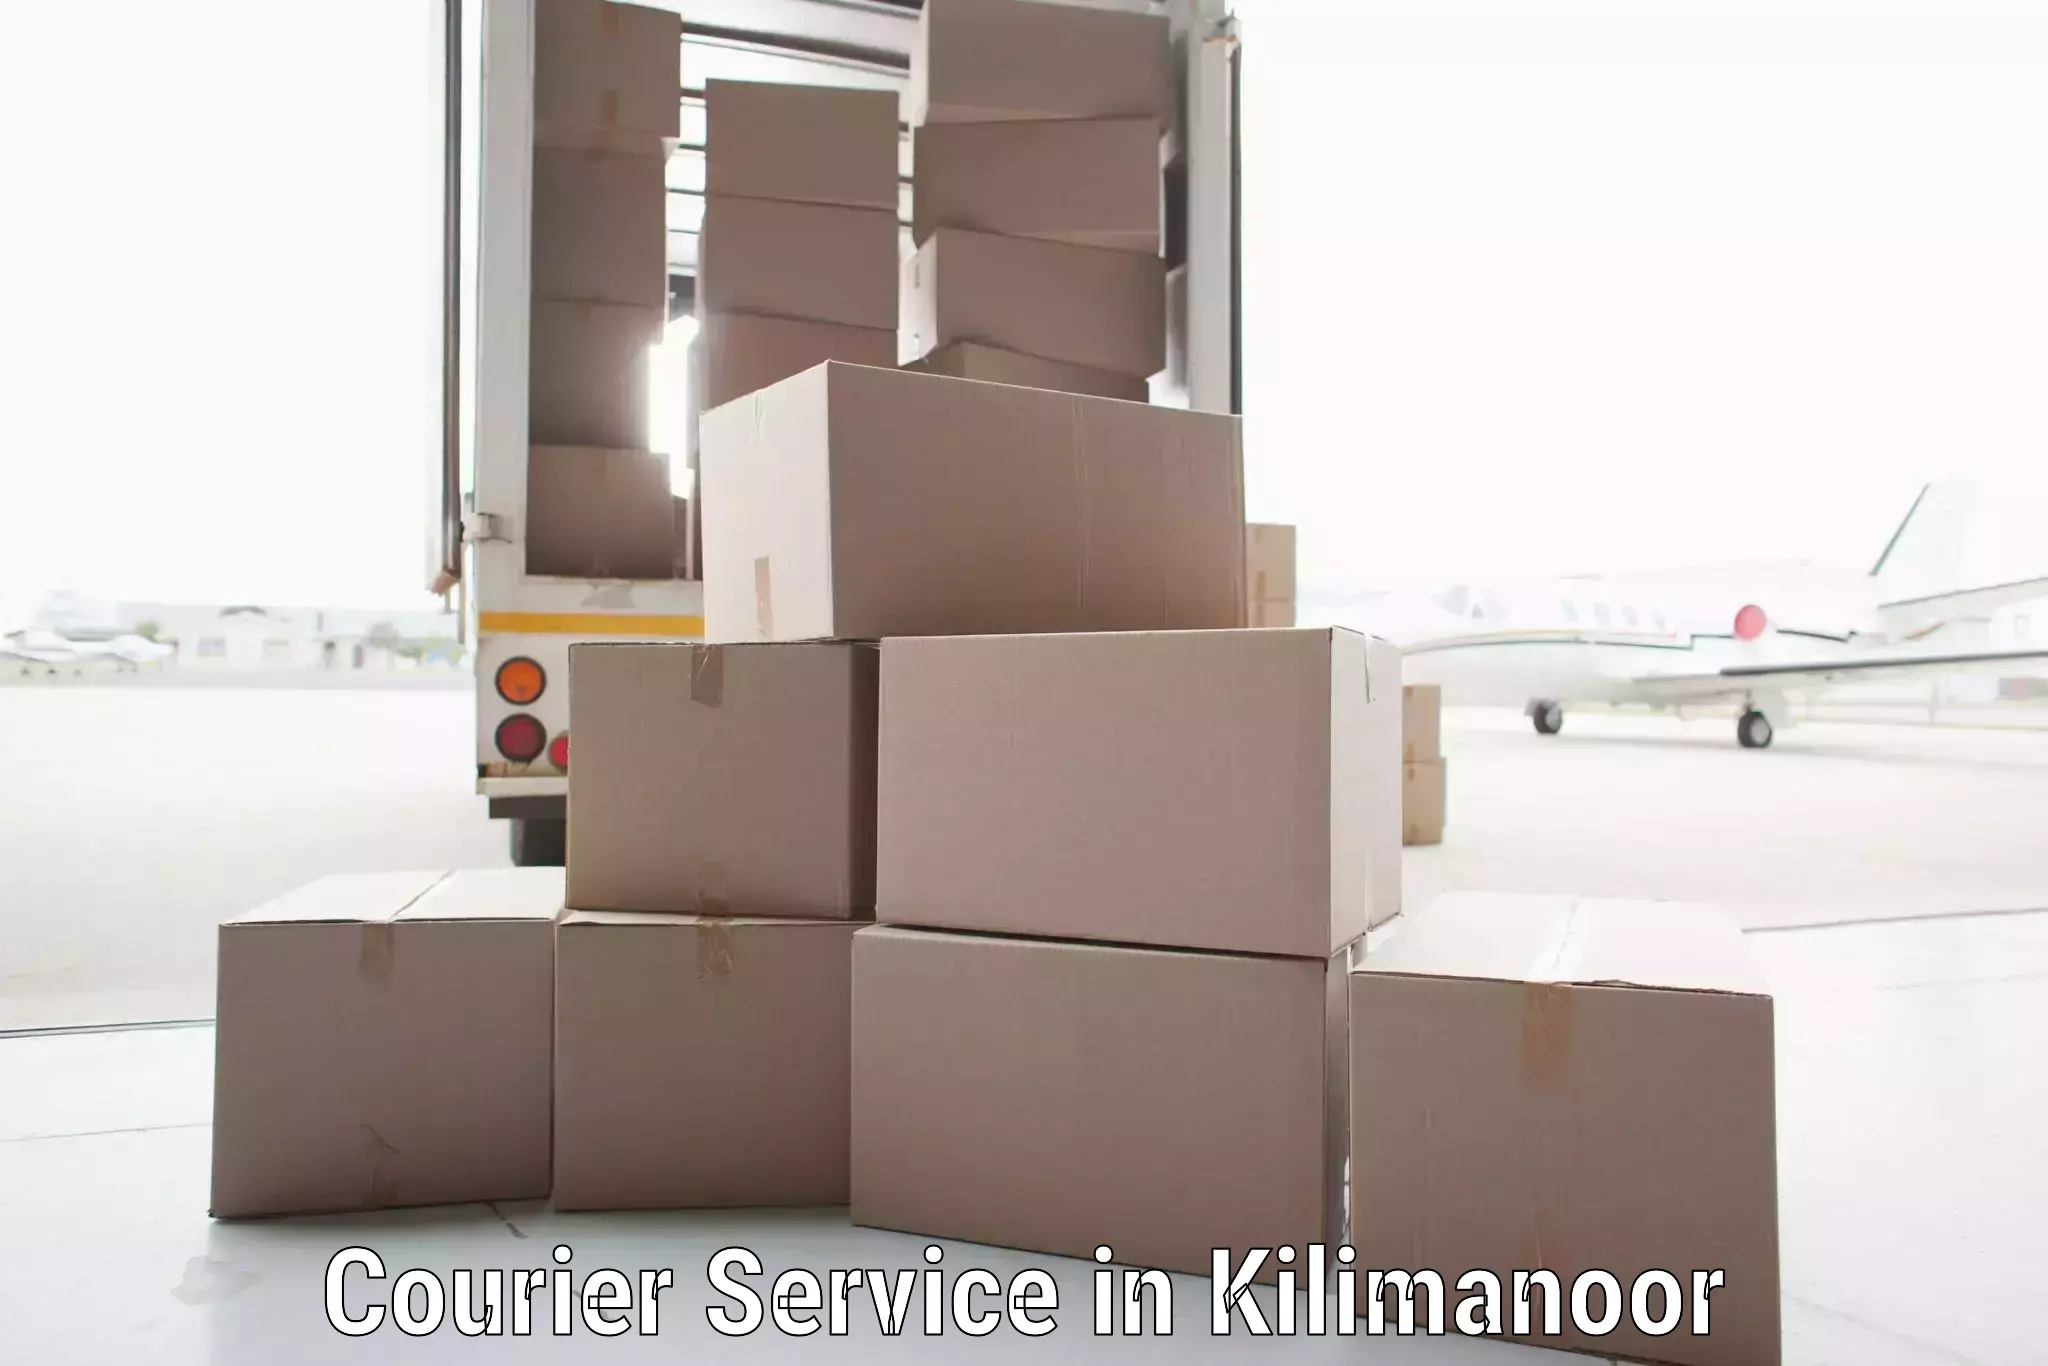 Track and trace shipping in Kilimanoor